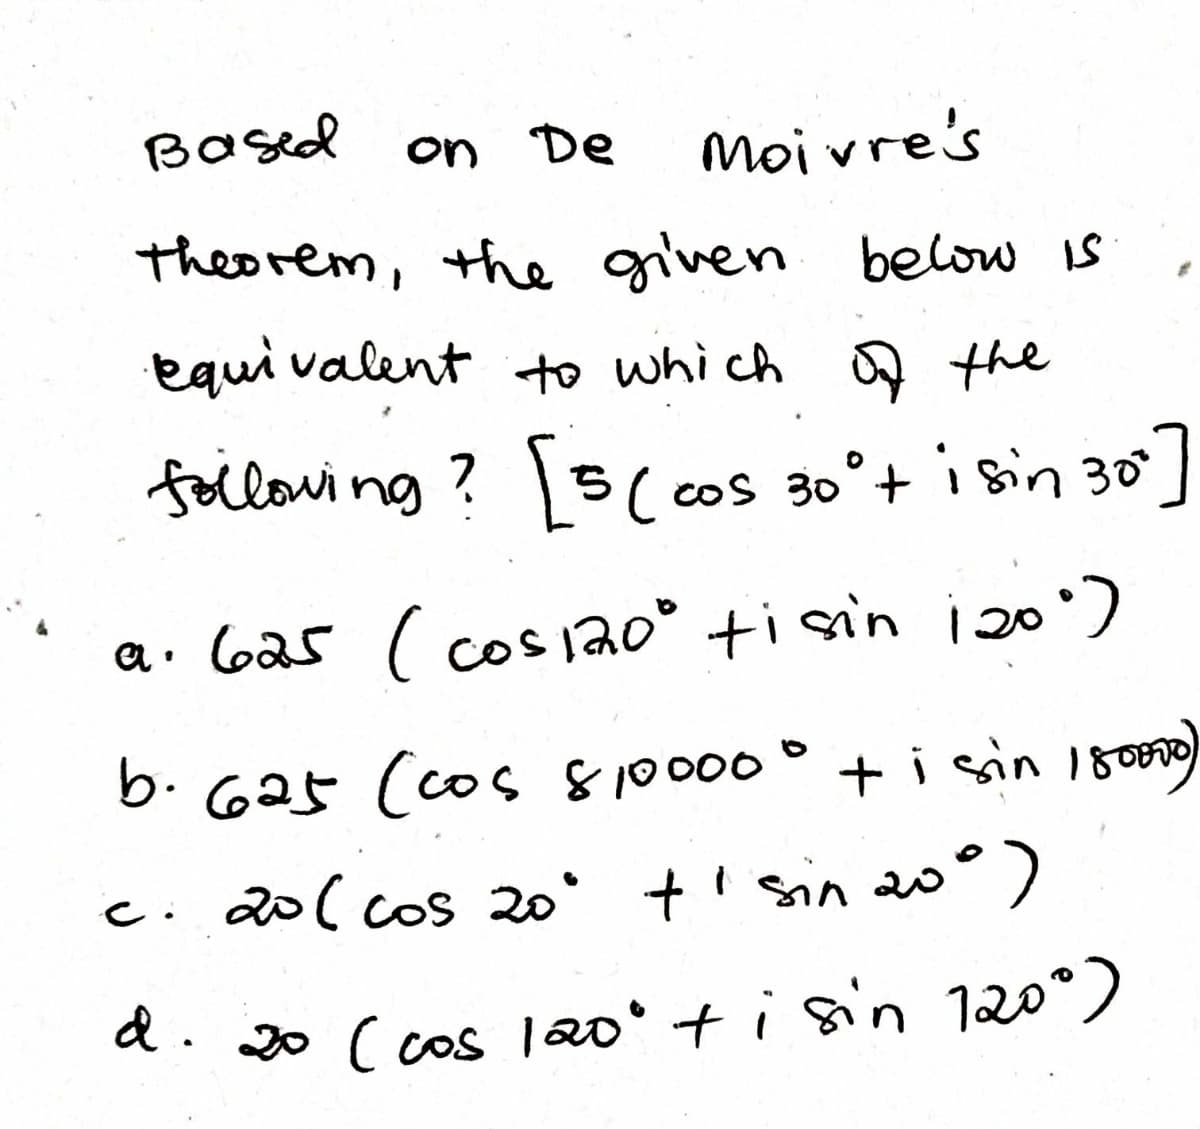 Based
on De
moivre's
theorem, the given below is
equi valent to which Q the
following? 15( cos 30°+ i sin 30
CoS
a. 6a5 ( cos j20° ti sin i20)
b. 625 (cos 810000° + i sin 18000)
c. 20( cos 20° +' sin 20
a. 0 ( cos |20°+isin 120°)
